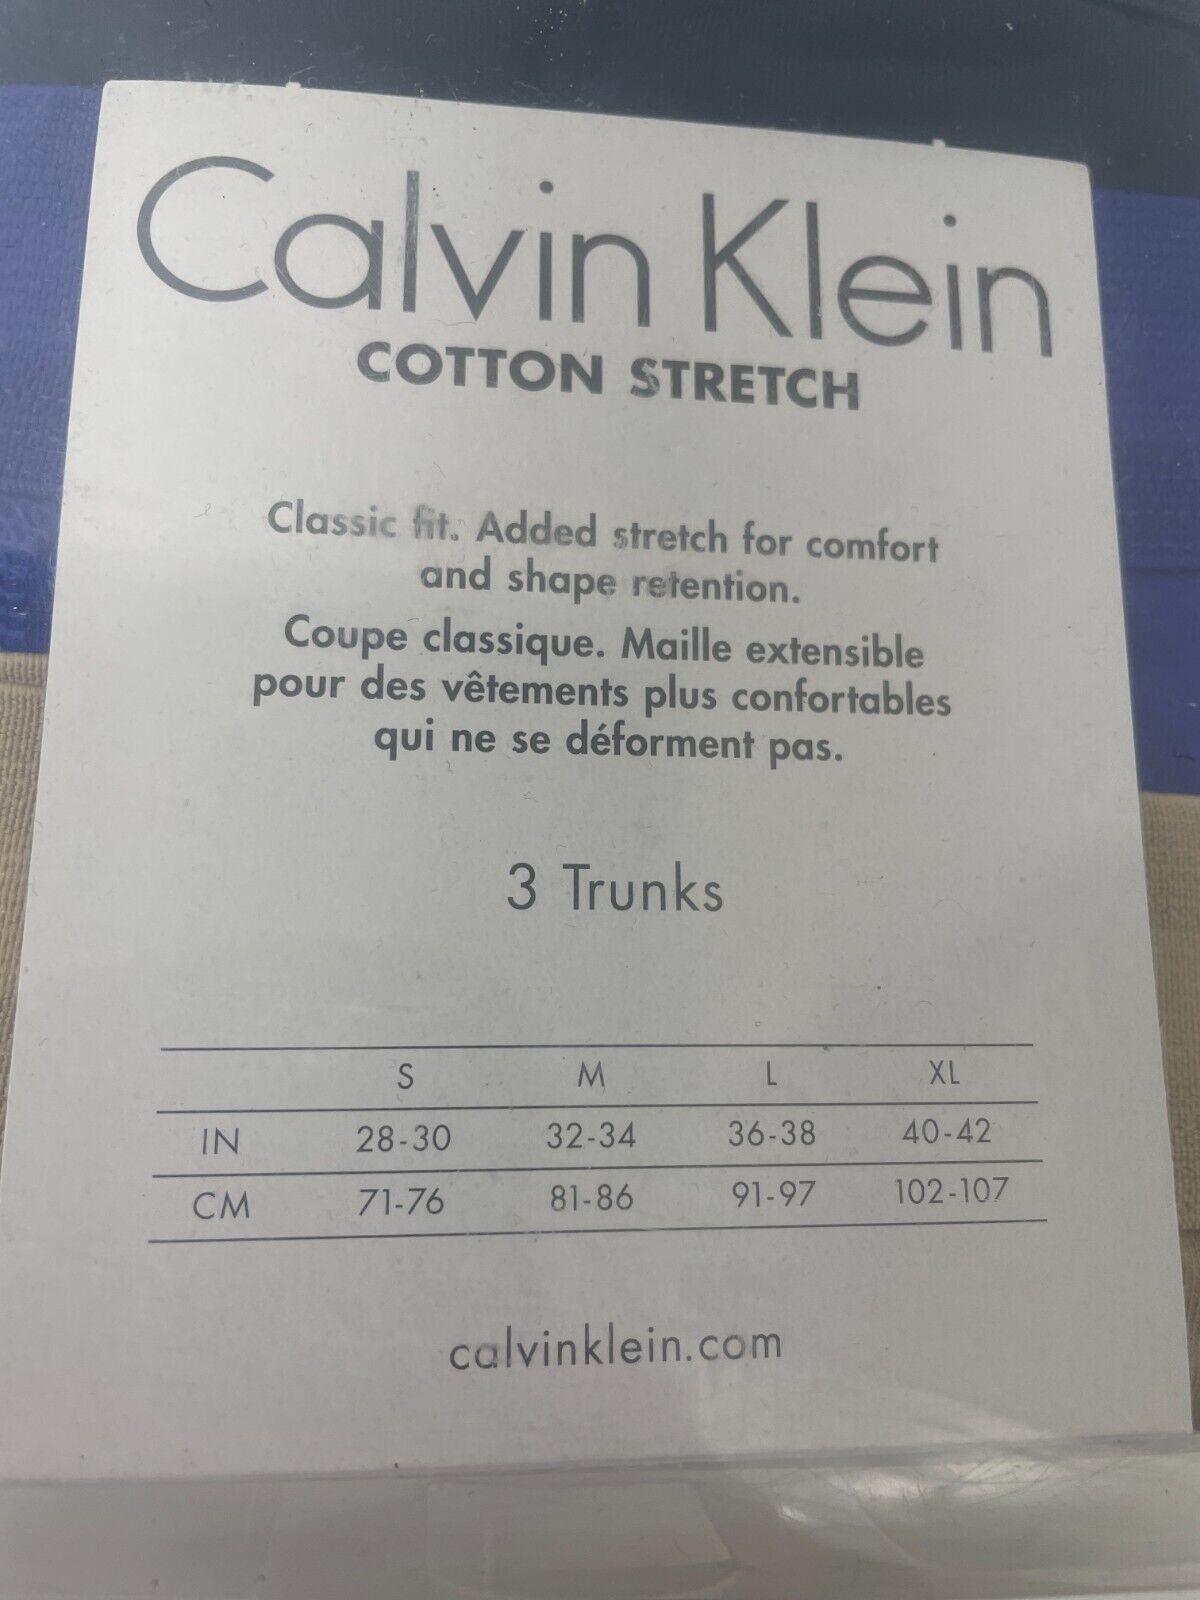 Calvin Klein Mens S Cotton Stretch Trunks 3 Pack Multicolor Classic Fit Mid Rise